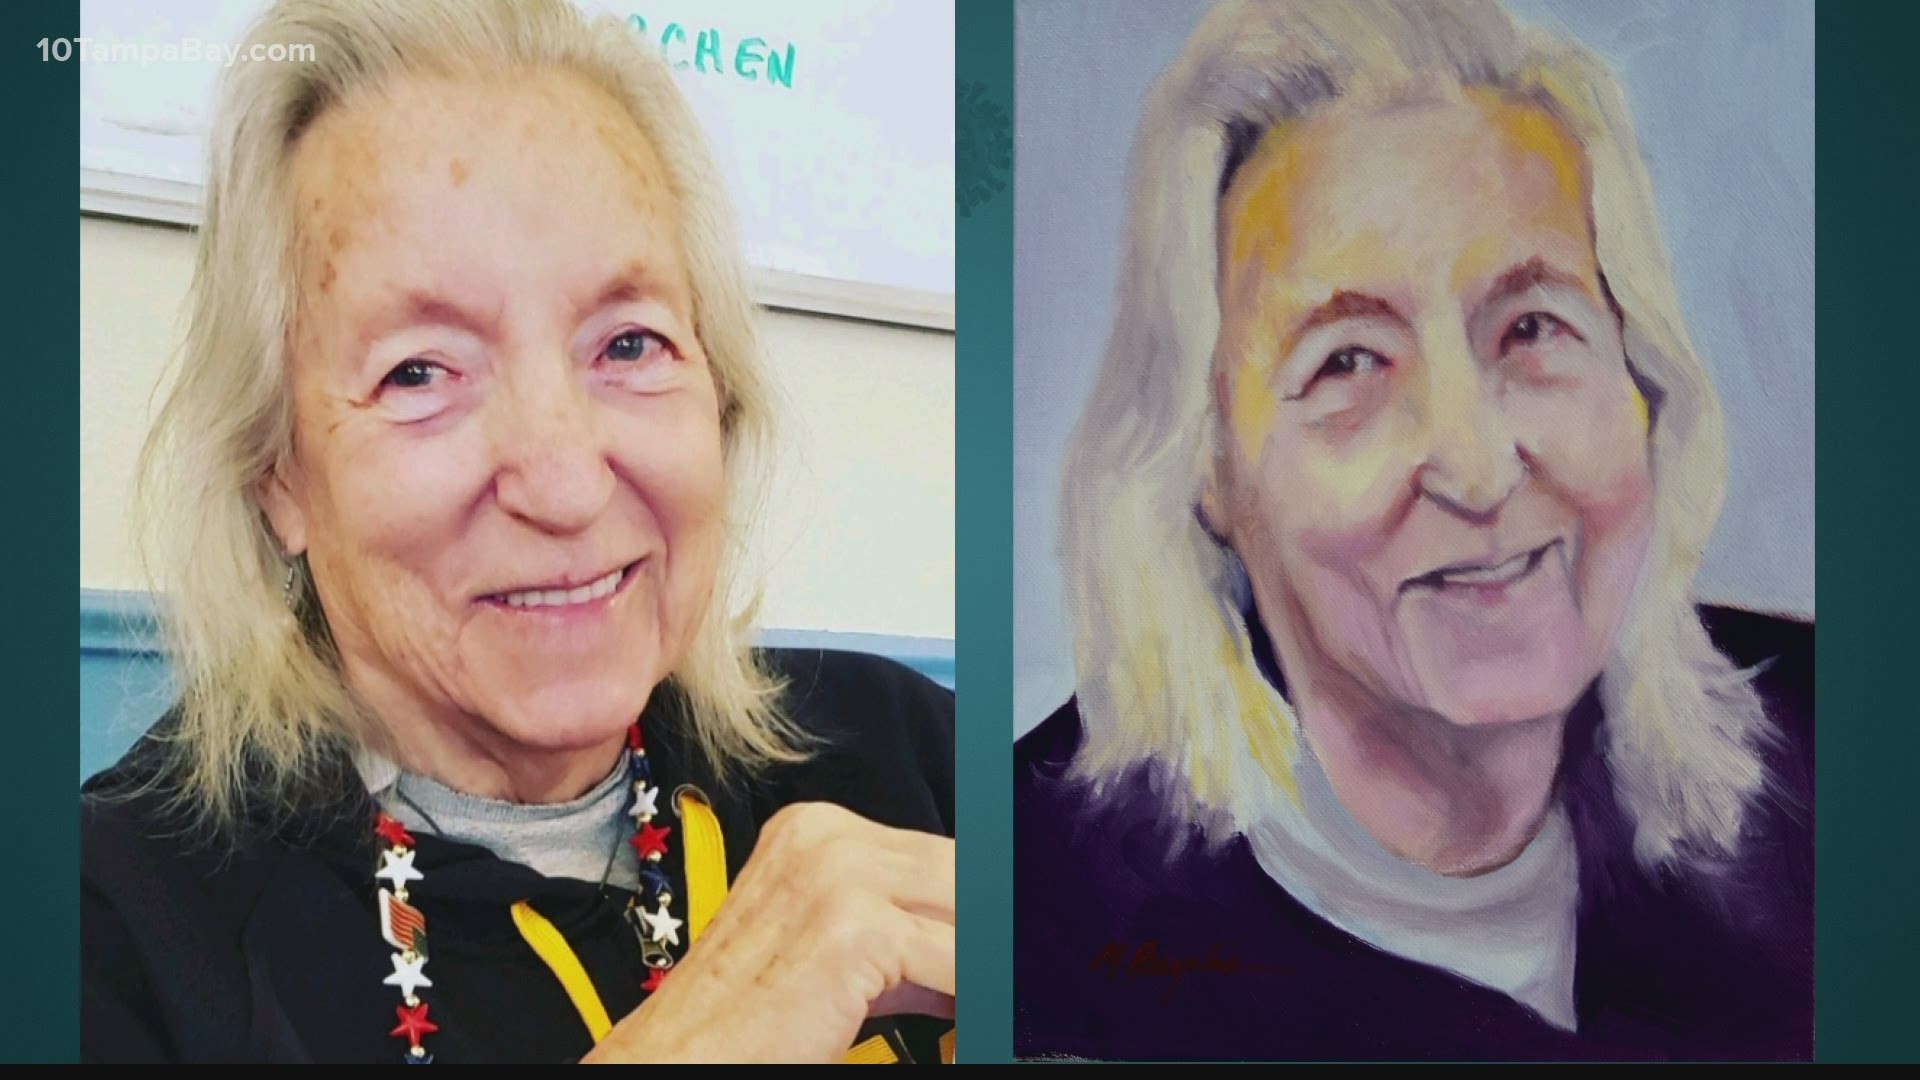 She found a way to turn her helplessness into art. The professional painter is healing heartache stroke by stroke with her oil paintings.